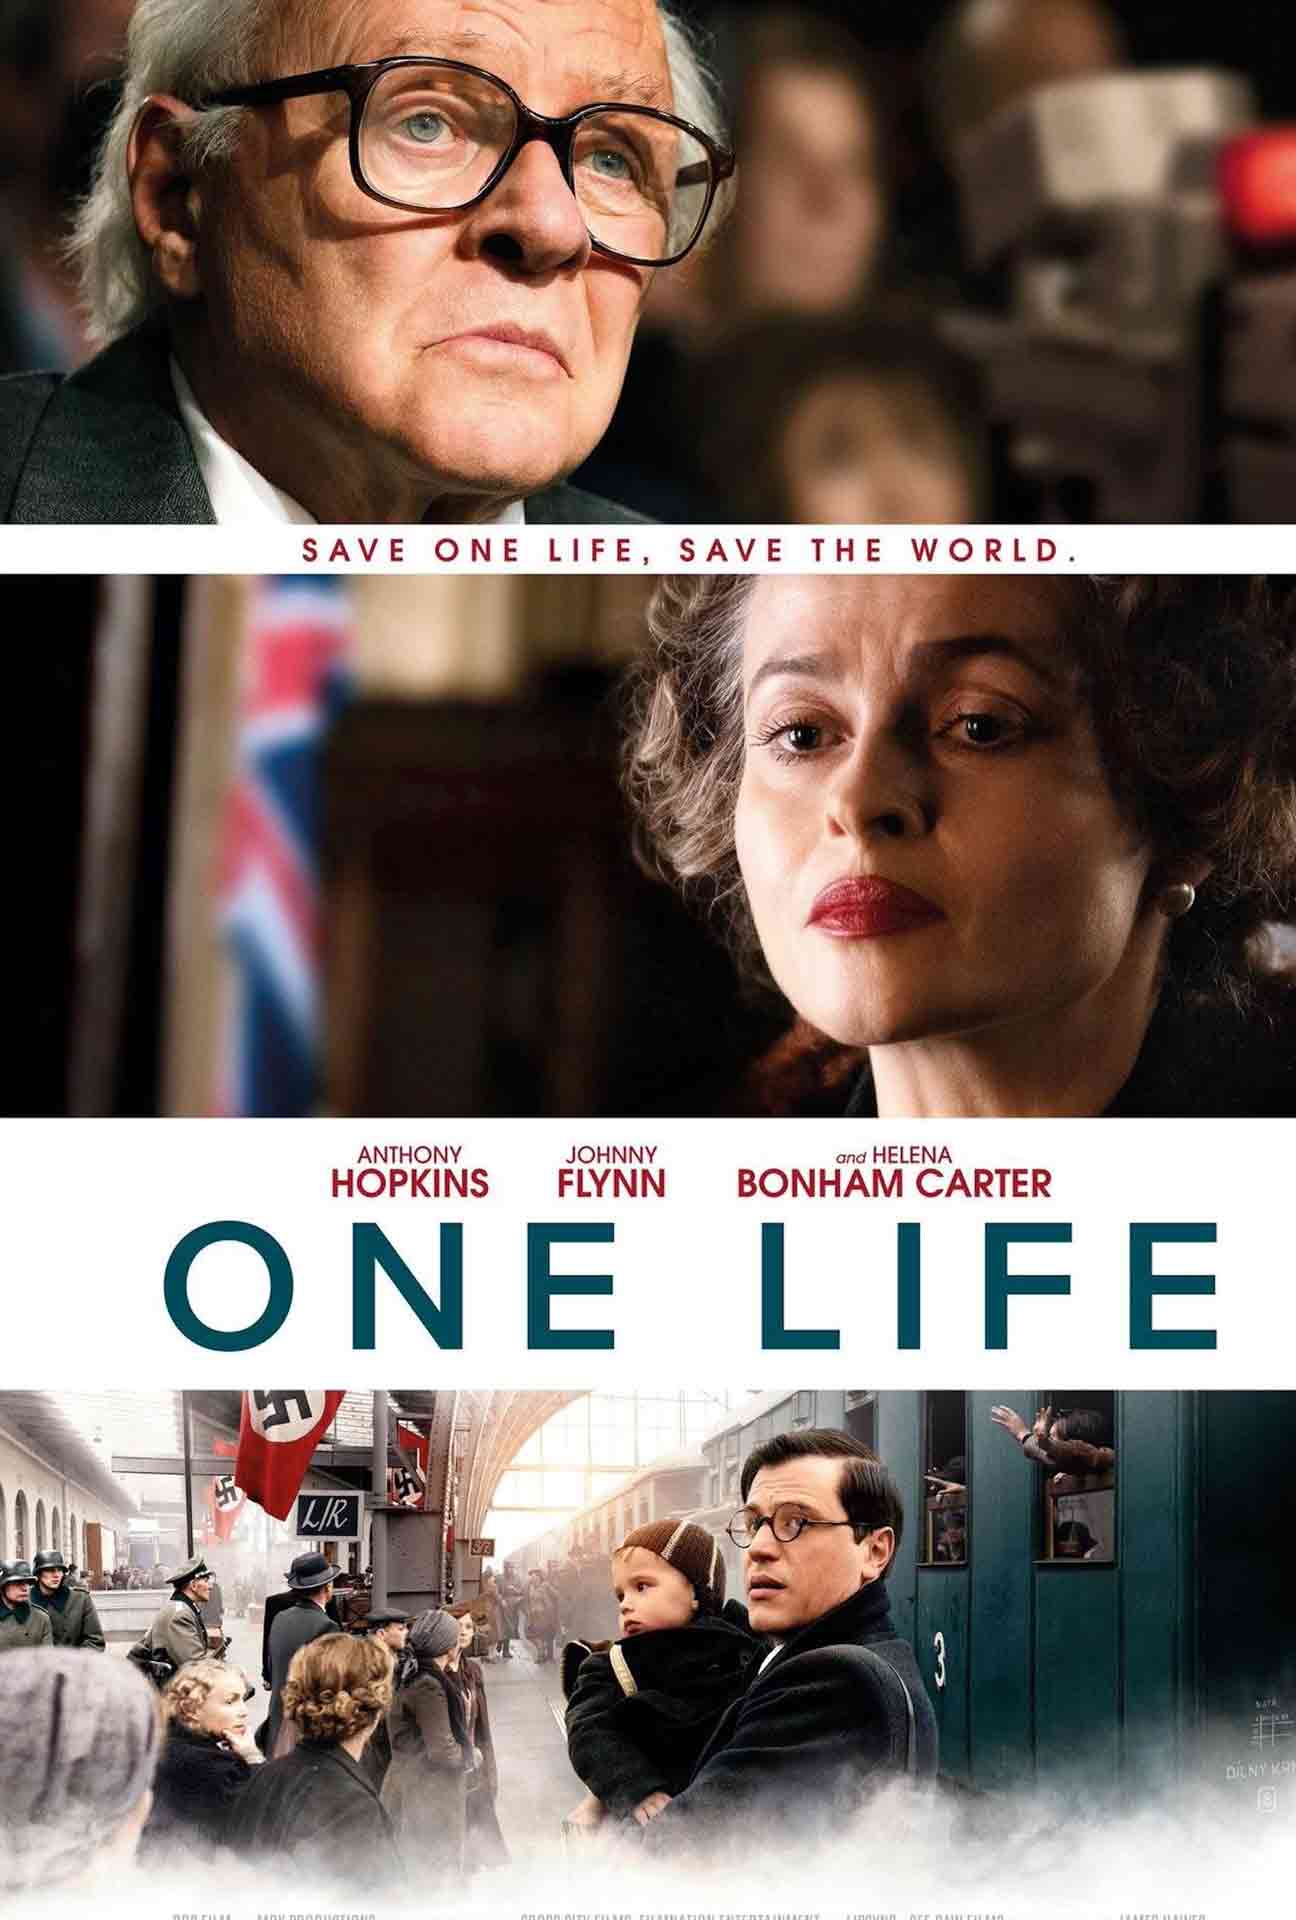 Movie Poster for One Life.